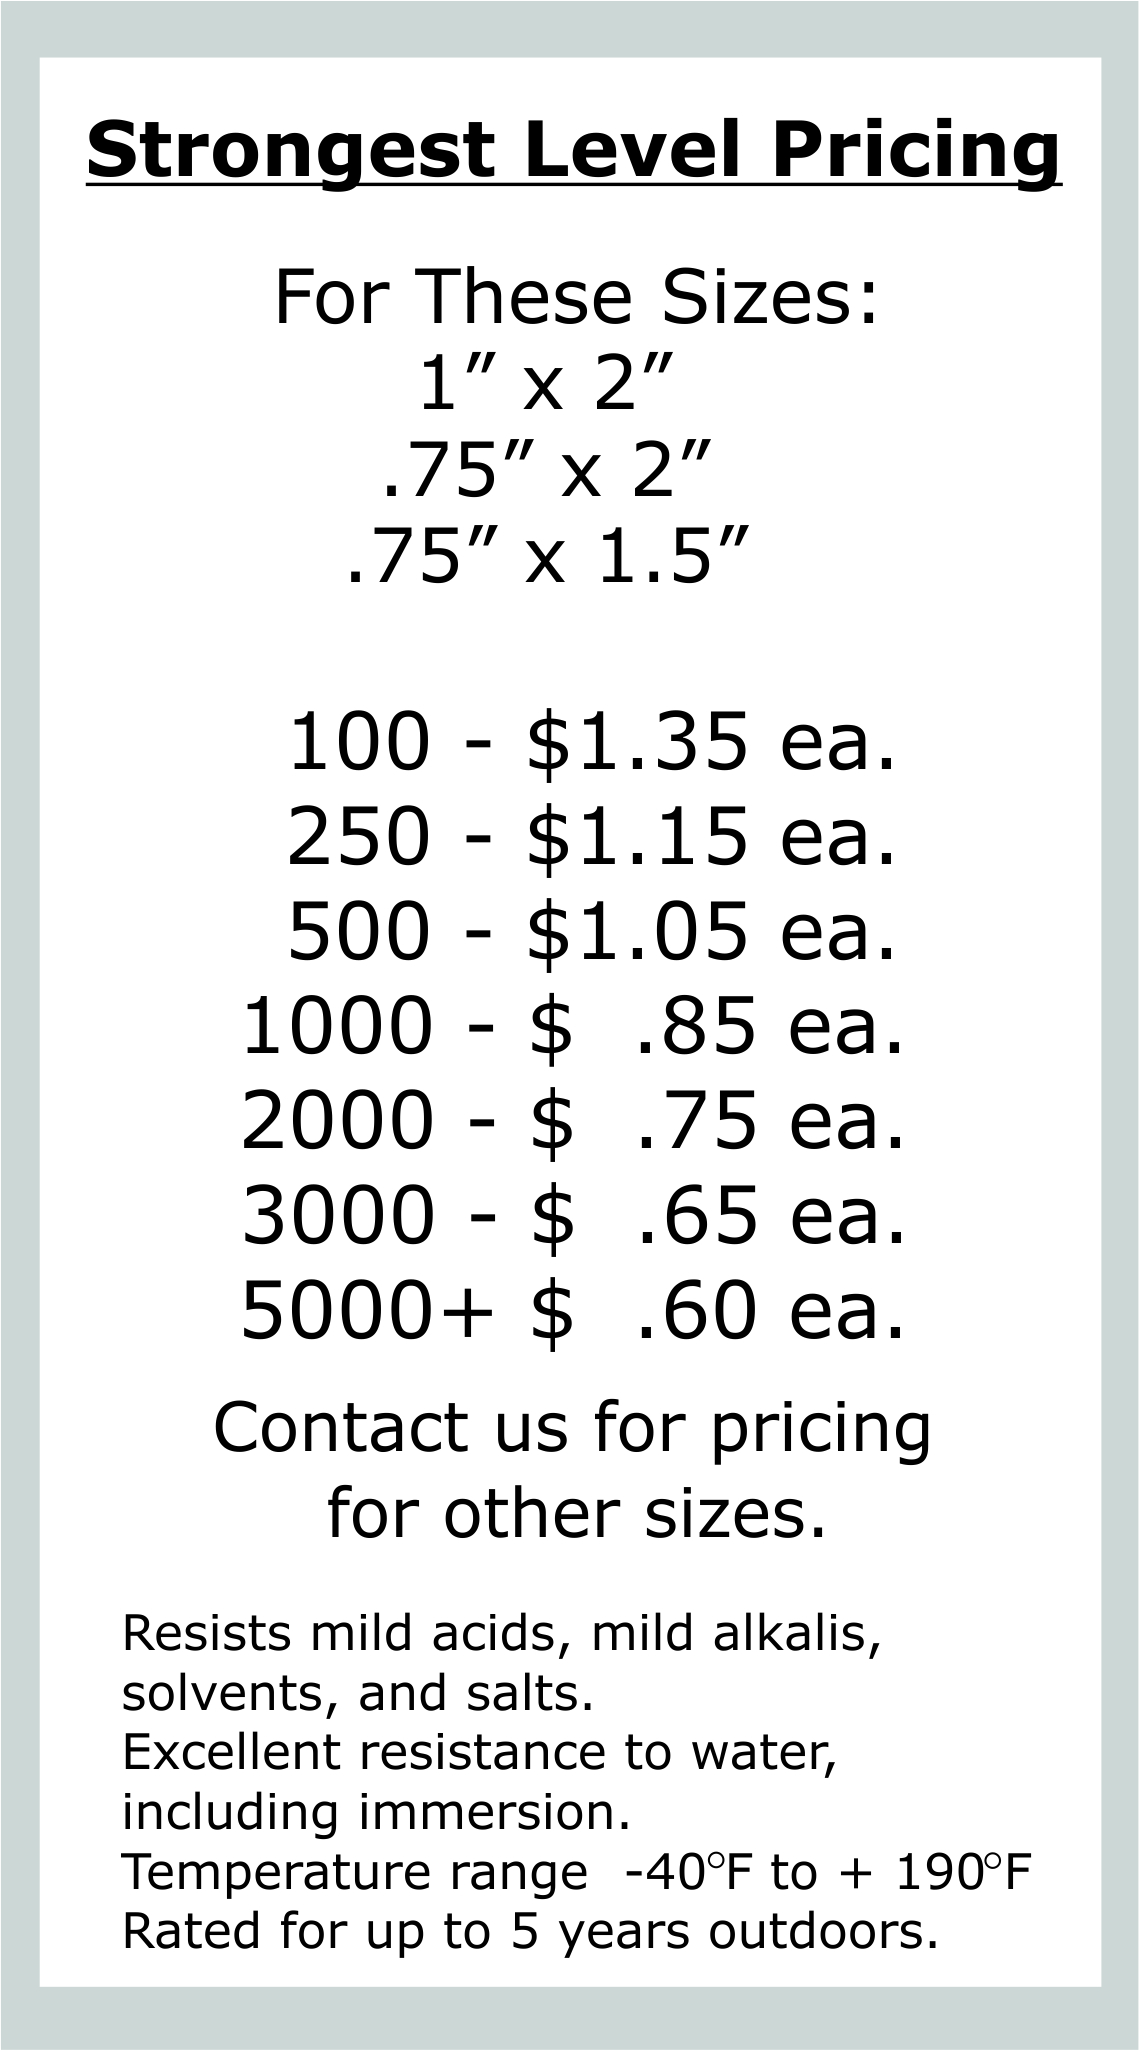 this is the pricing for our strongest level asset tags for equipment